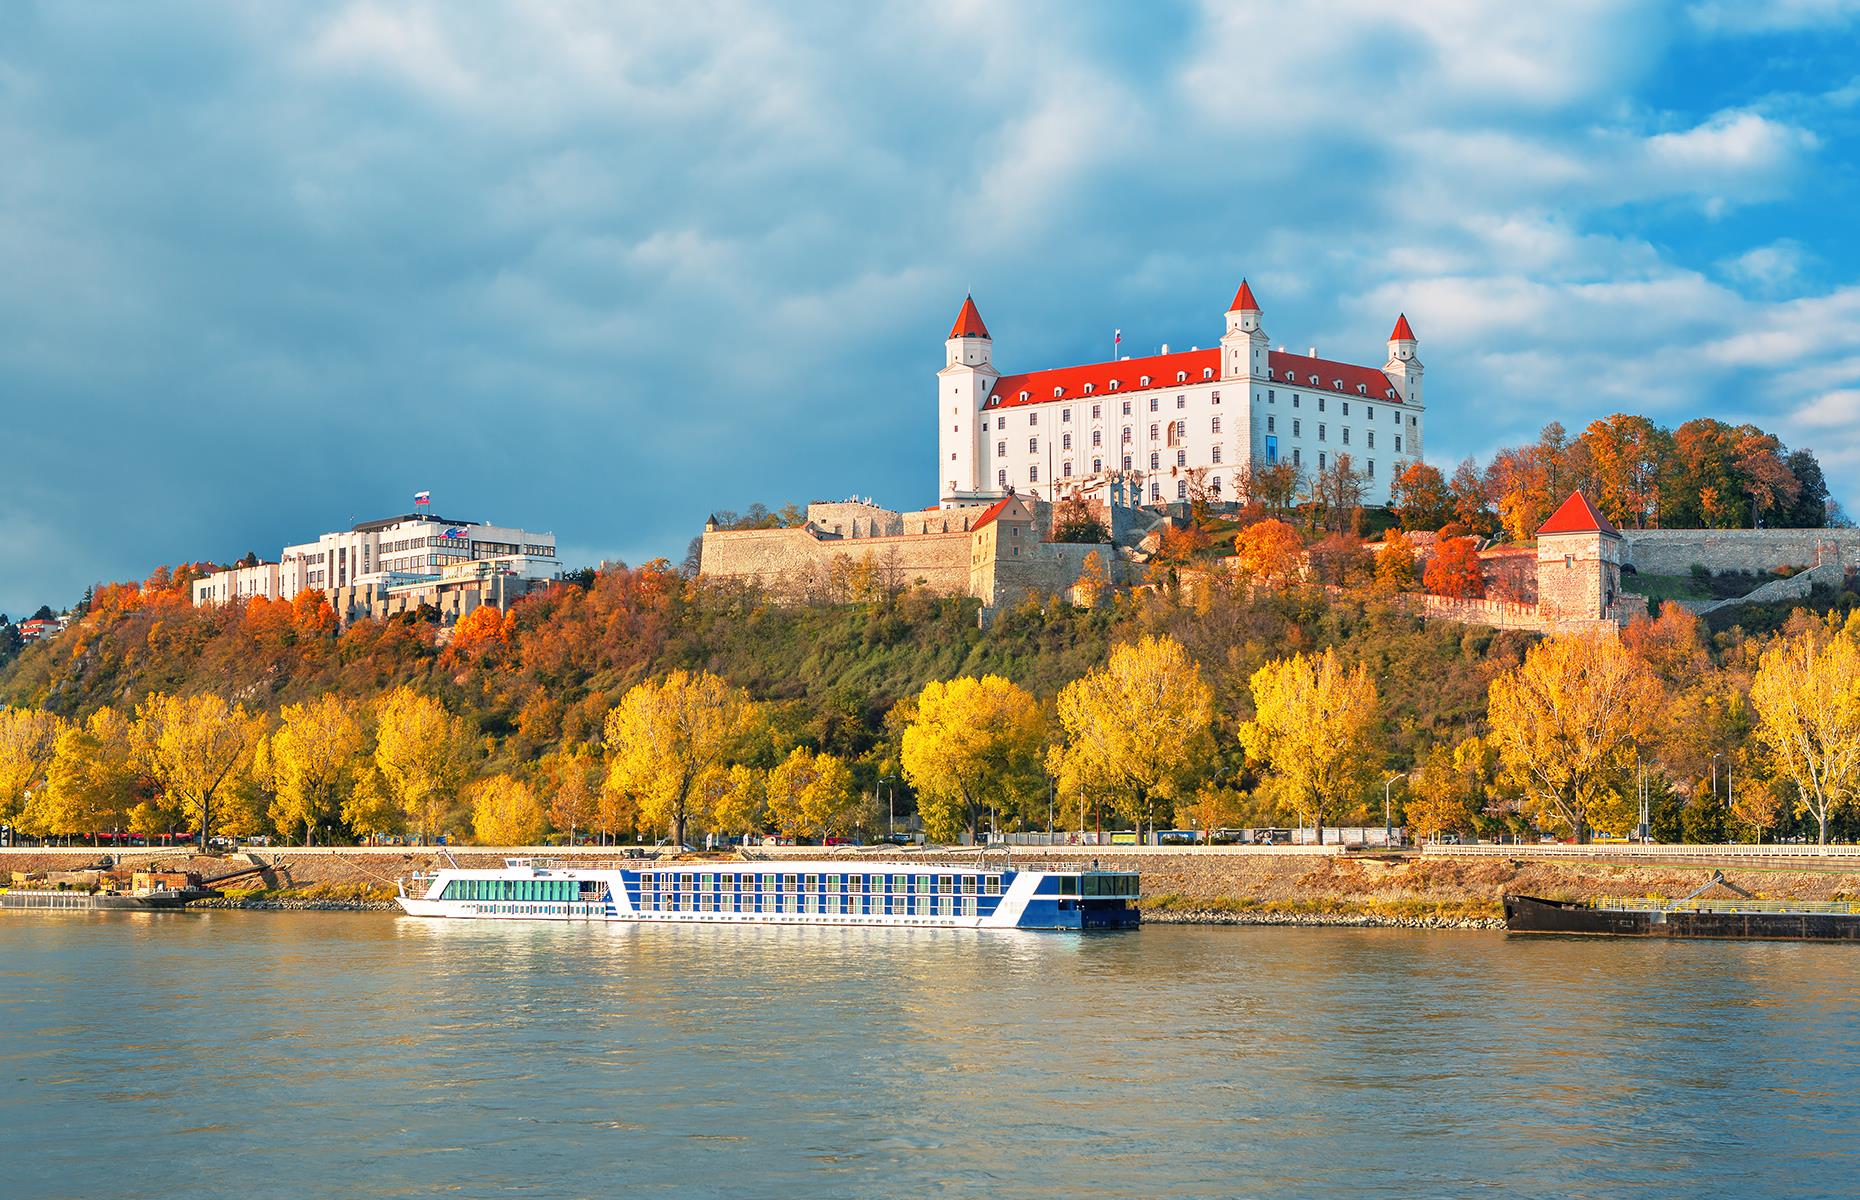 We’re increasingly keen to avoid crowds, and river cruises have cottoned on to this. They’re going all out to offer cruises year-round – not just during the summer (traditionally the busiest time for river cruises), but in April and May and September and October, when there will be fewer selfie sticks and thinner crowds to contend with. Pictured is Bratislava Castle rising above the Danube River in autumn.